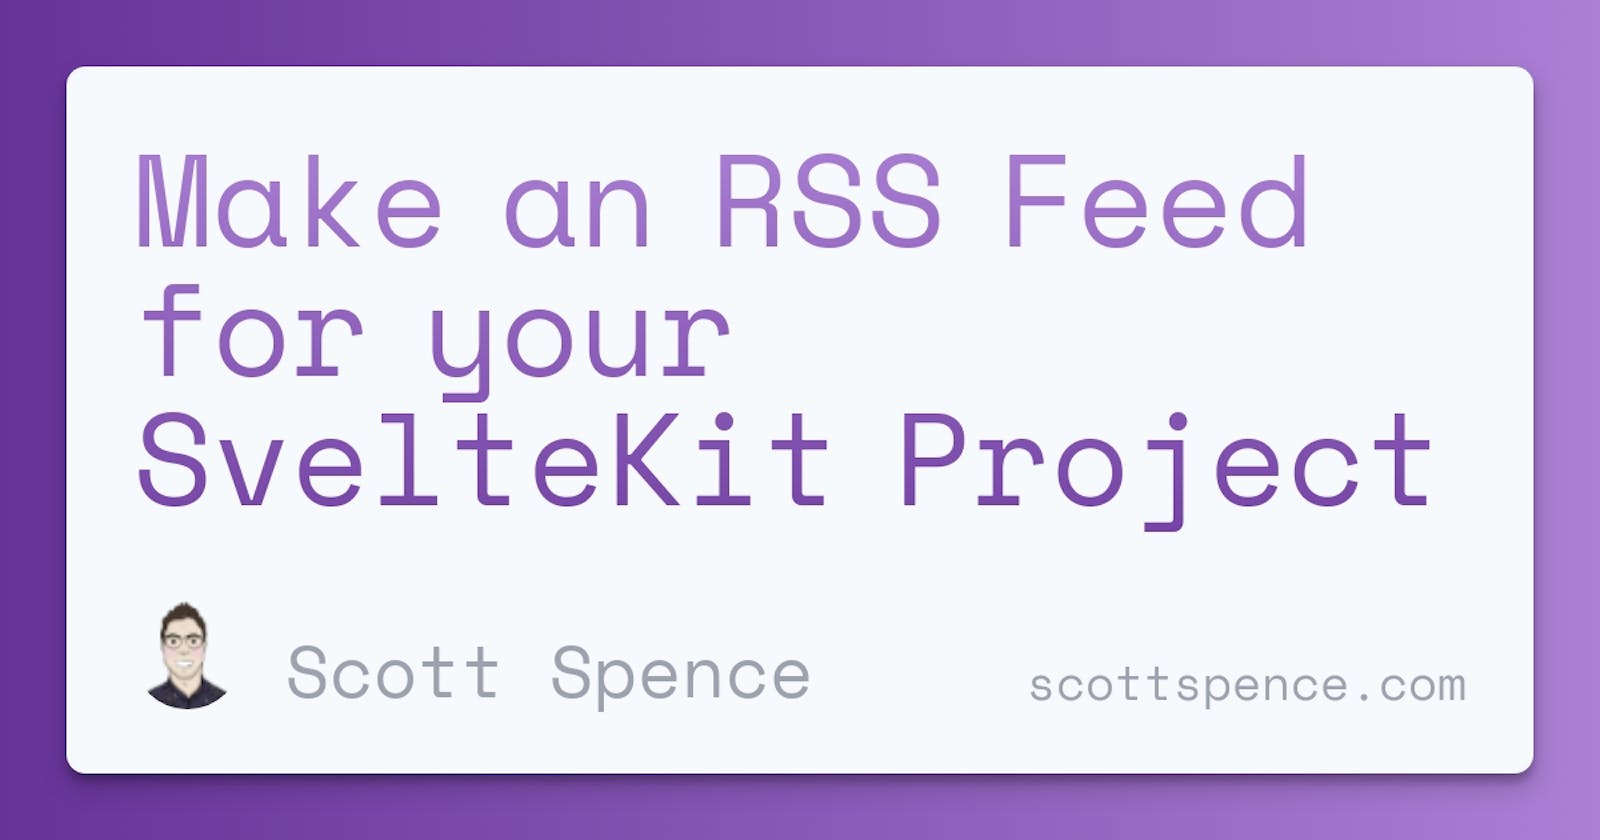 Make an RSS Feed for your SvelteKit Project